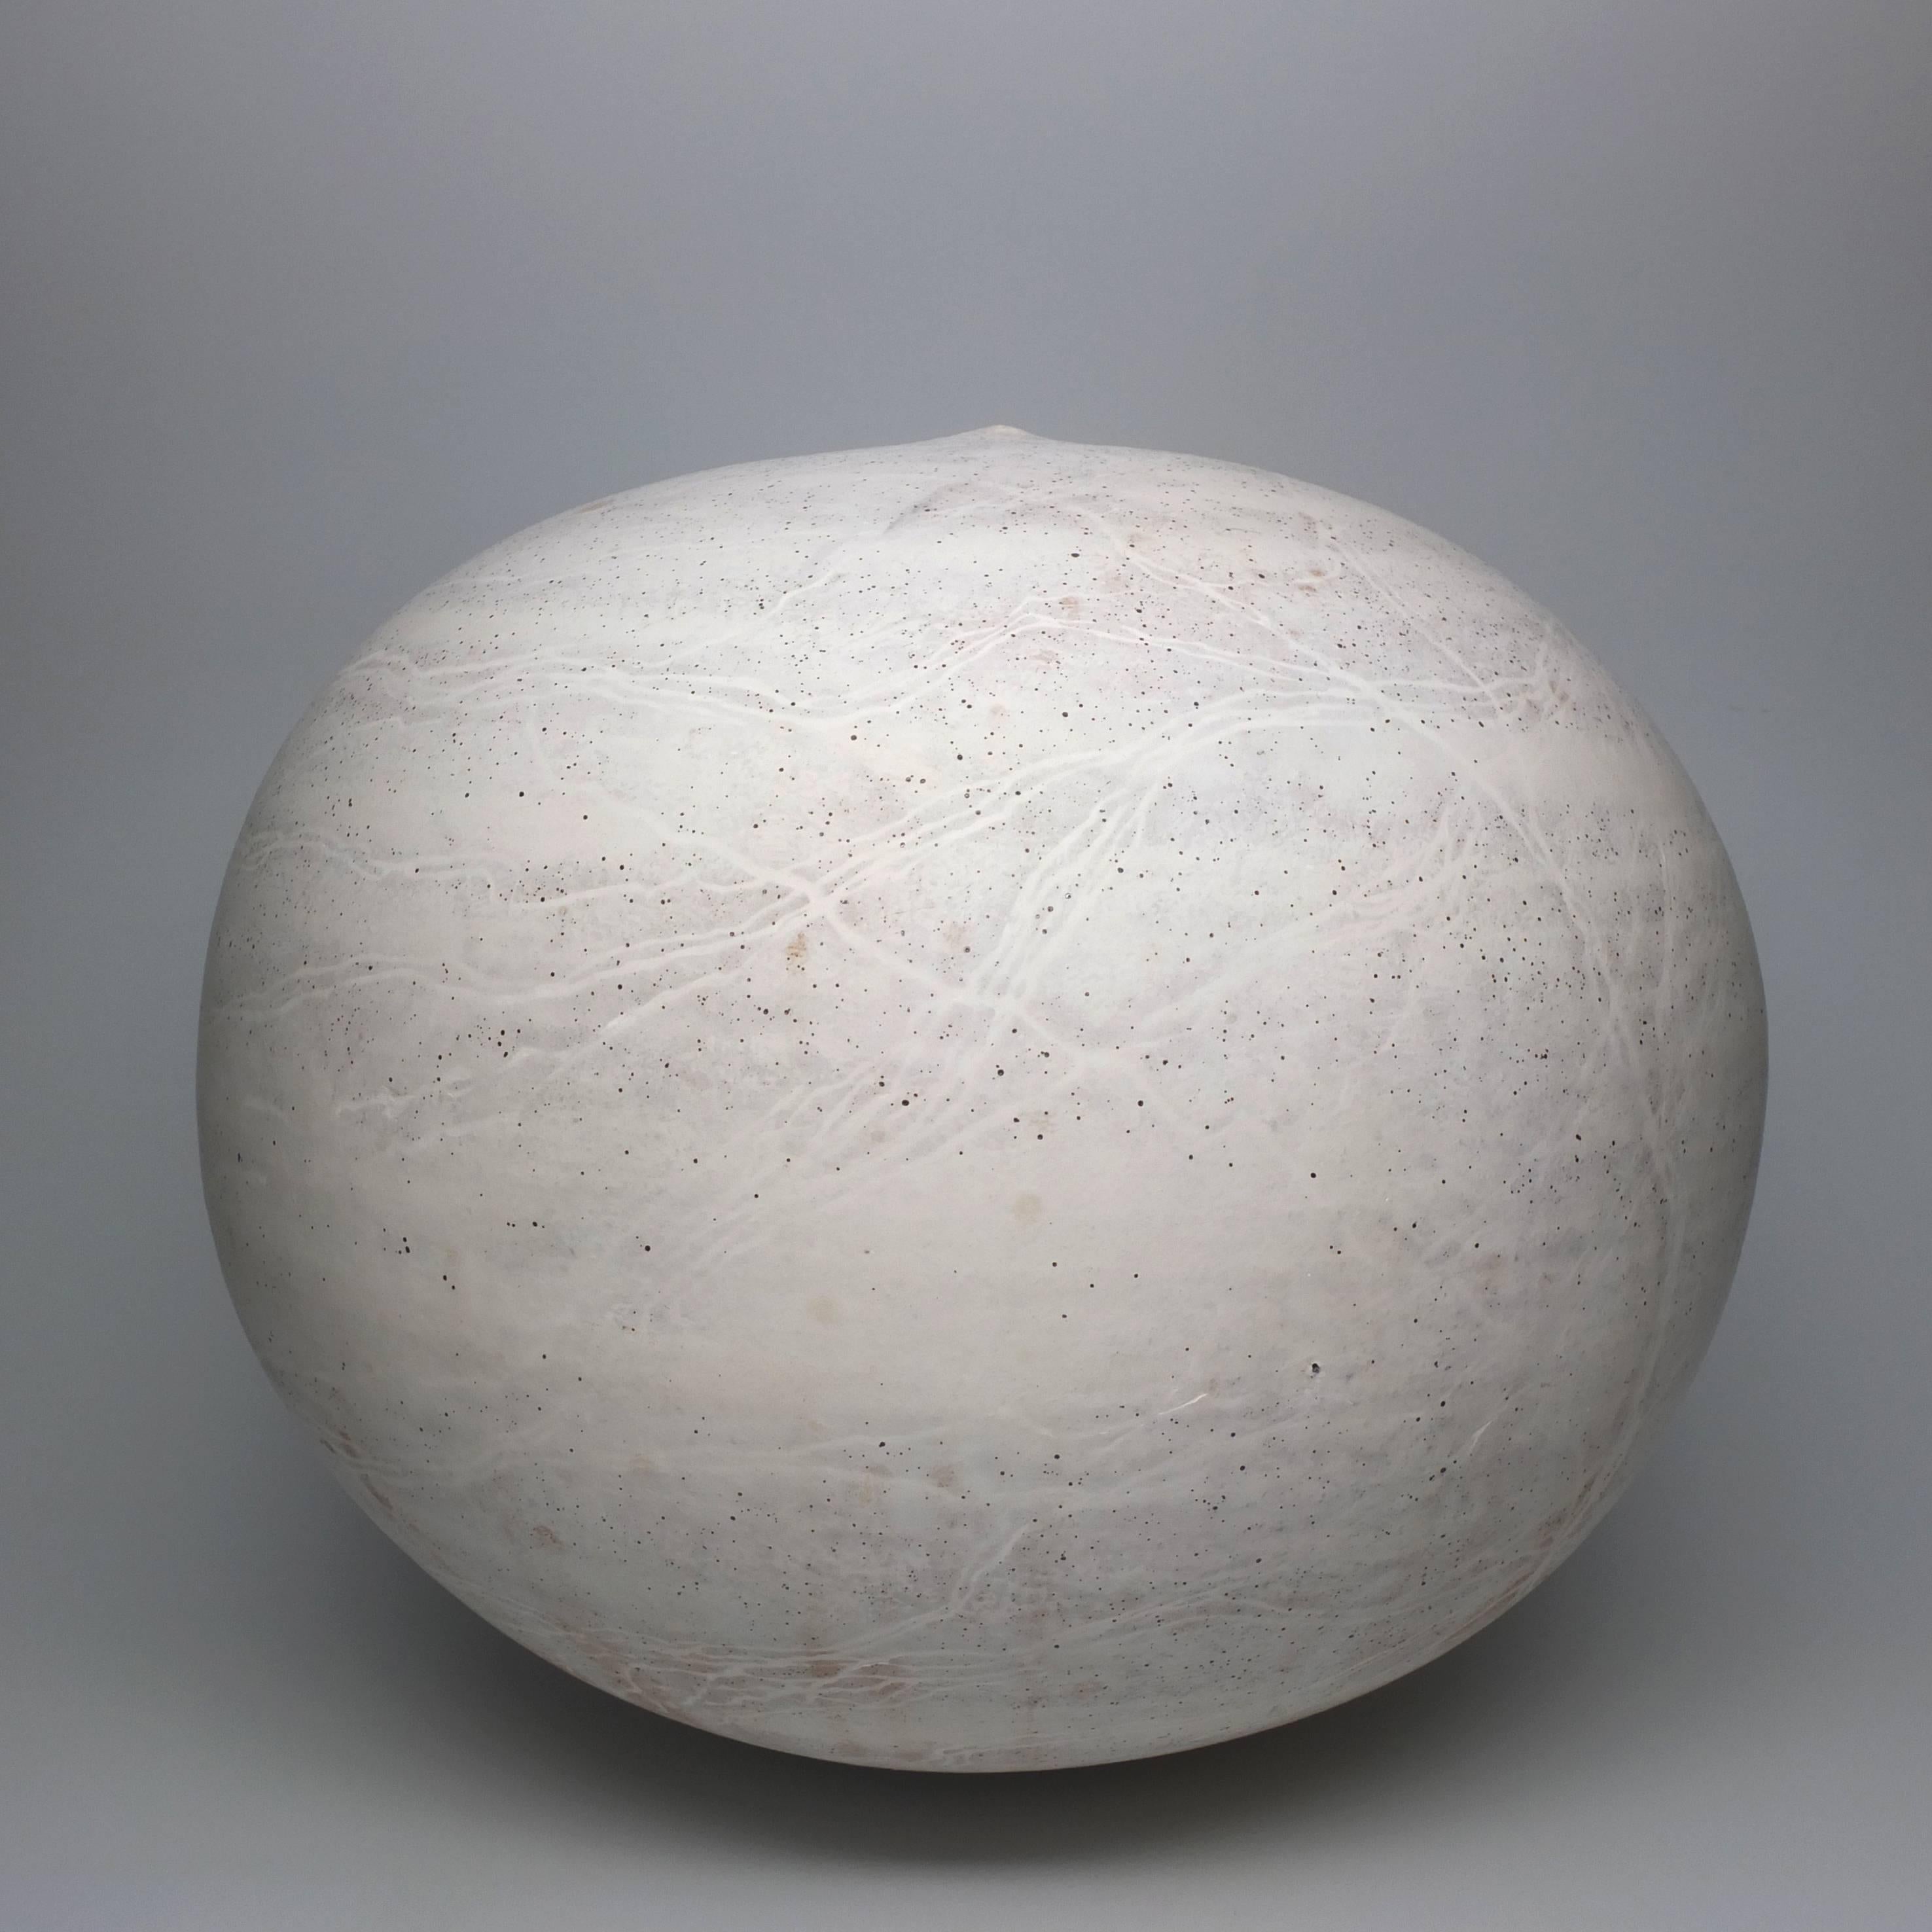 American Substantial Round Vase or Pot in Matte White by NYC Artist Jeffrey Loura, 2018